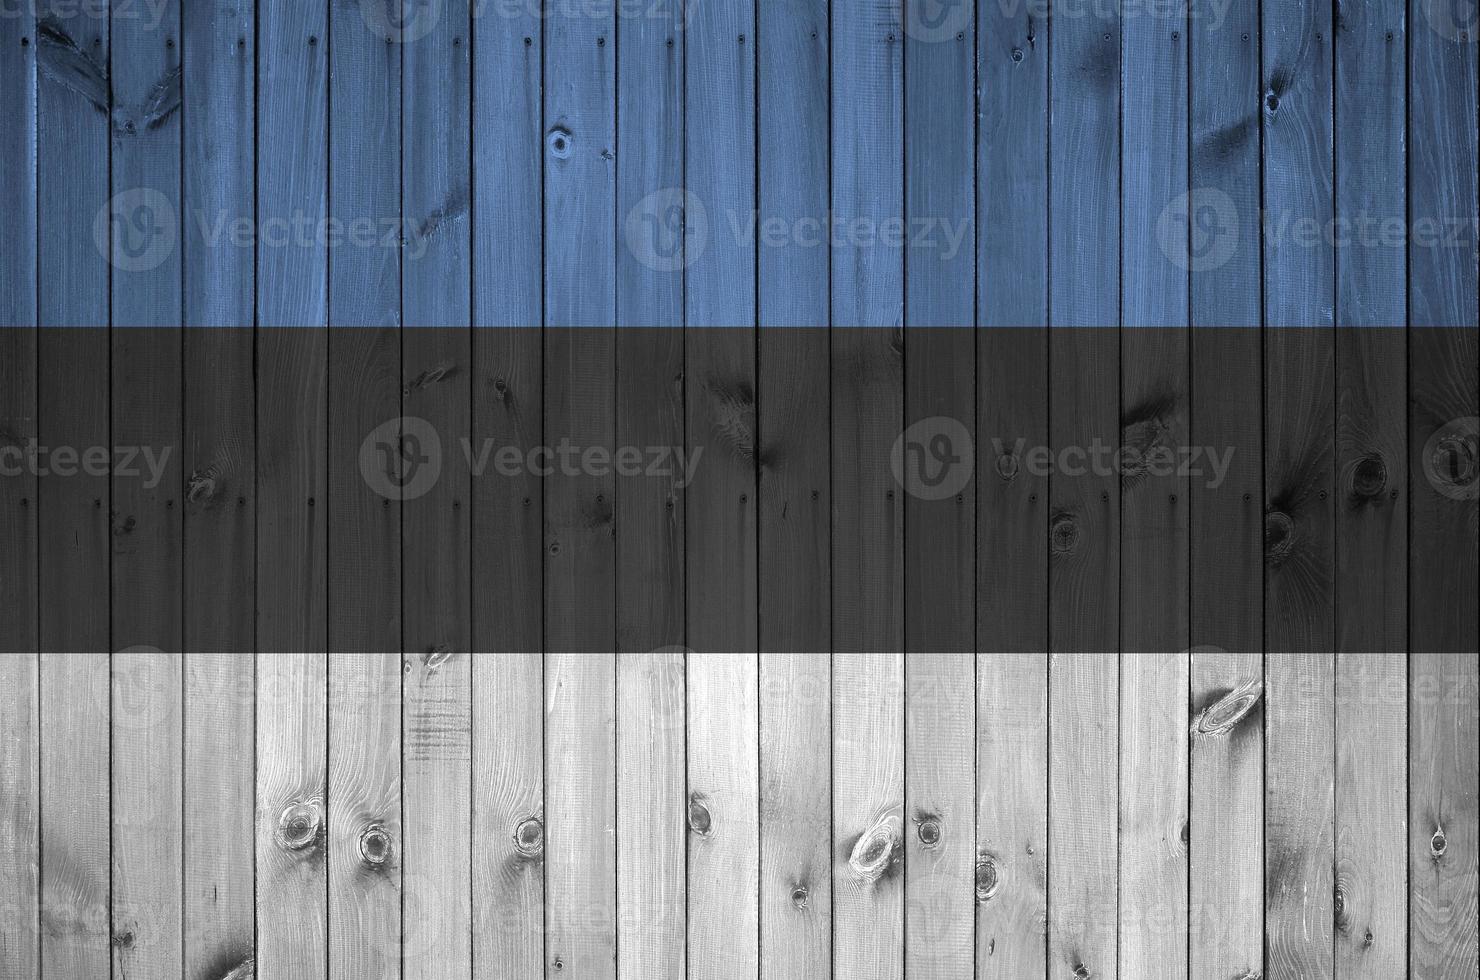 Estonia flag depicted in bright paint colors on old wooden wall. Textured banner on rough background photo